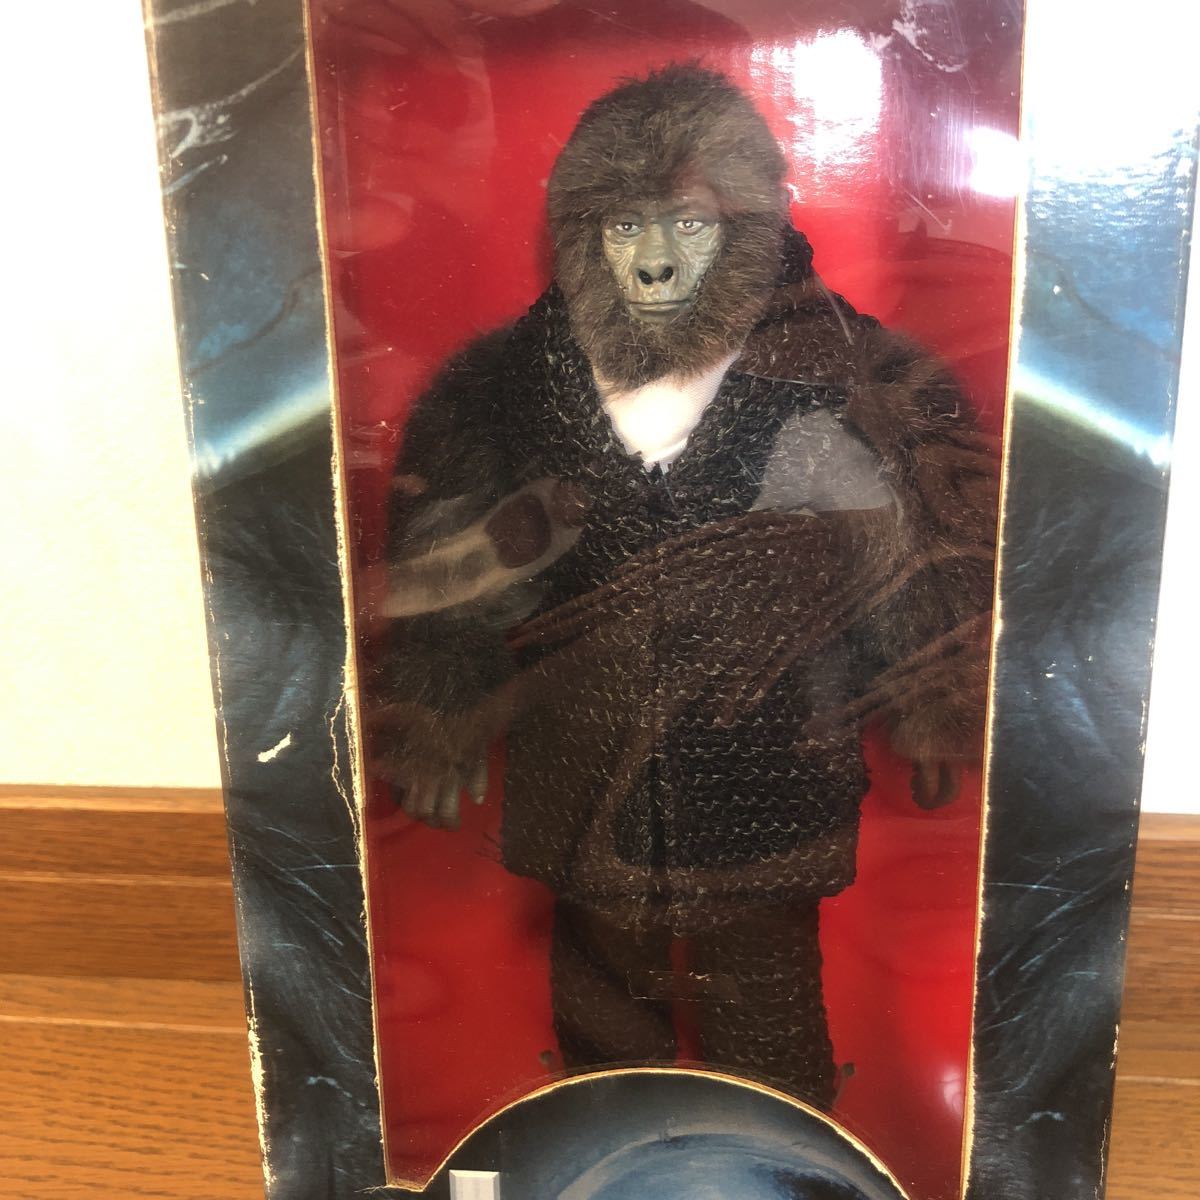  new goods unopened Planet of the Apes super doll 20cm KRULL